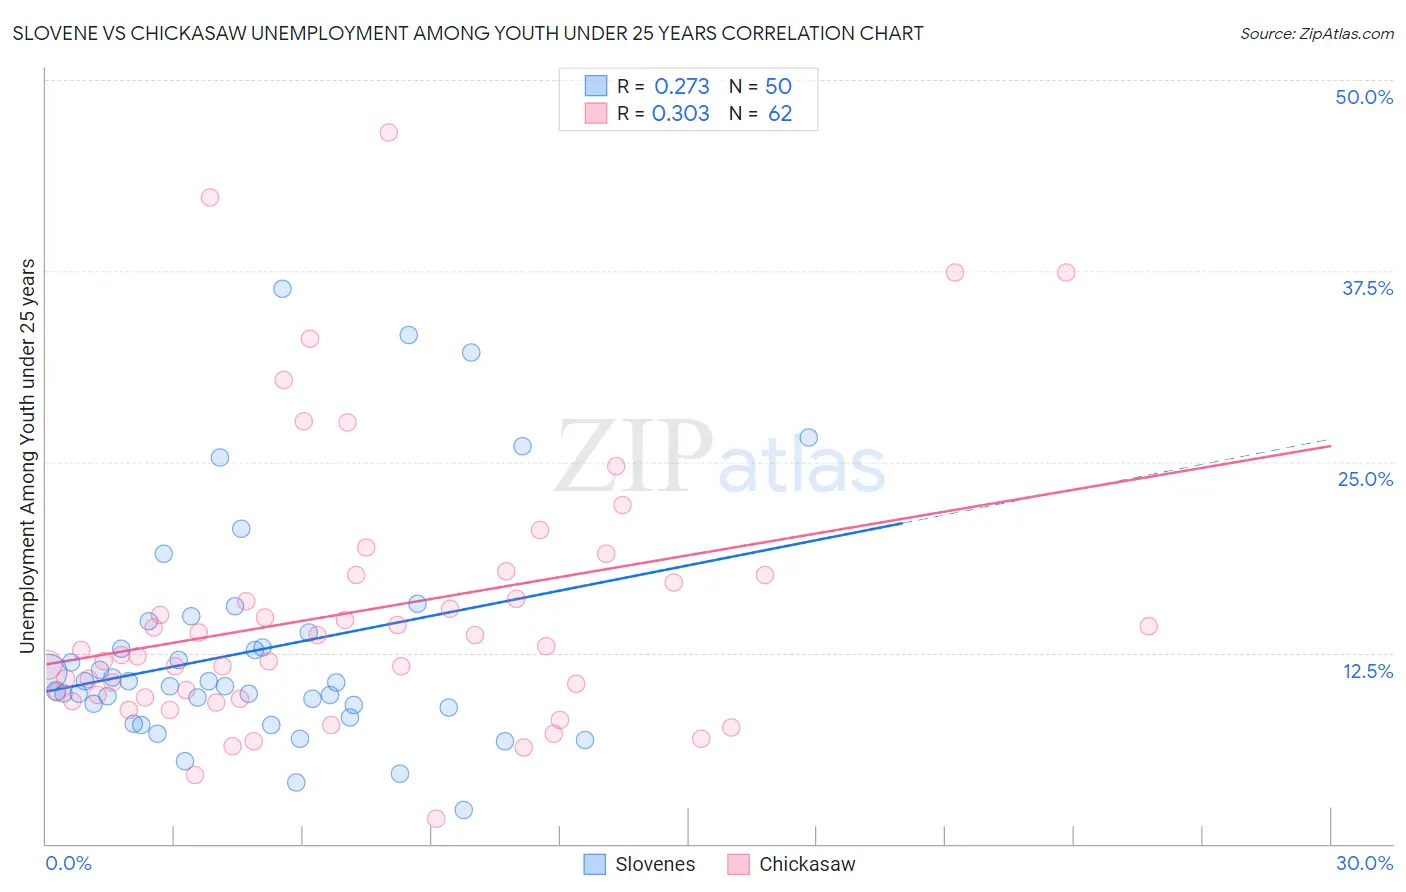 Slovene vs Chickasaw Unemployment Among Youth under 25 years